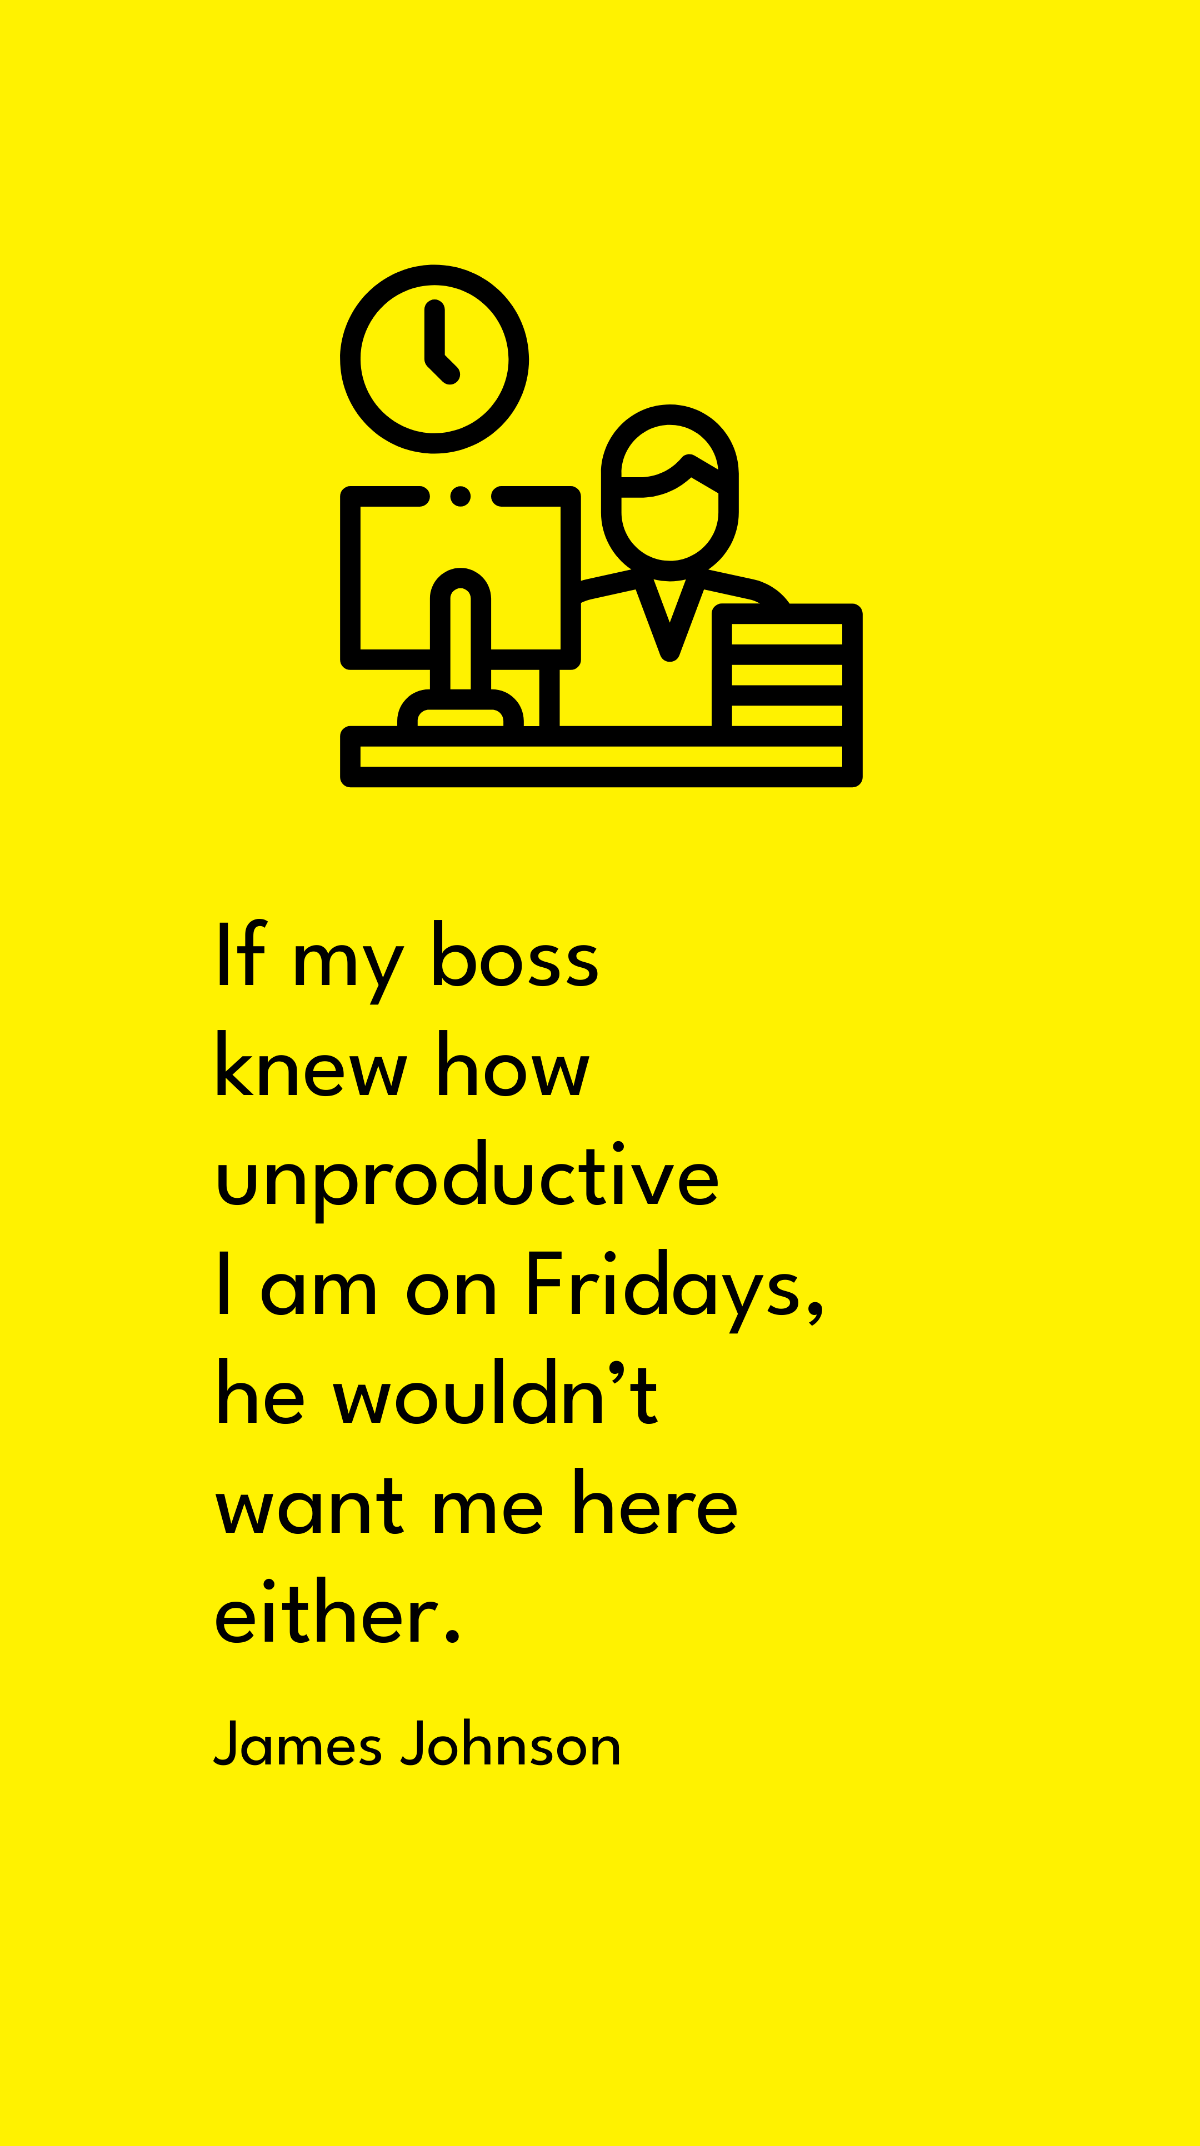 James Johnson - If my boss knew how unproductive I am on Fridays, he wouldn’t want me here either. 